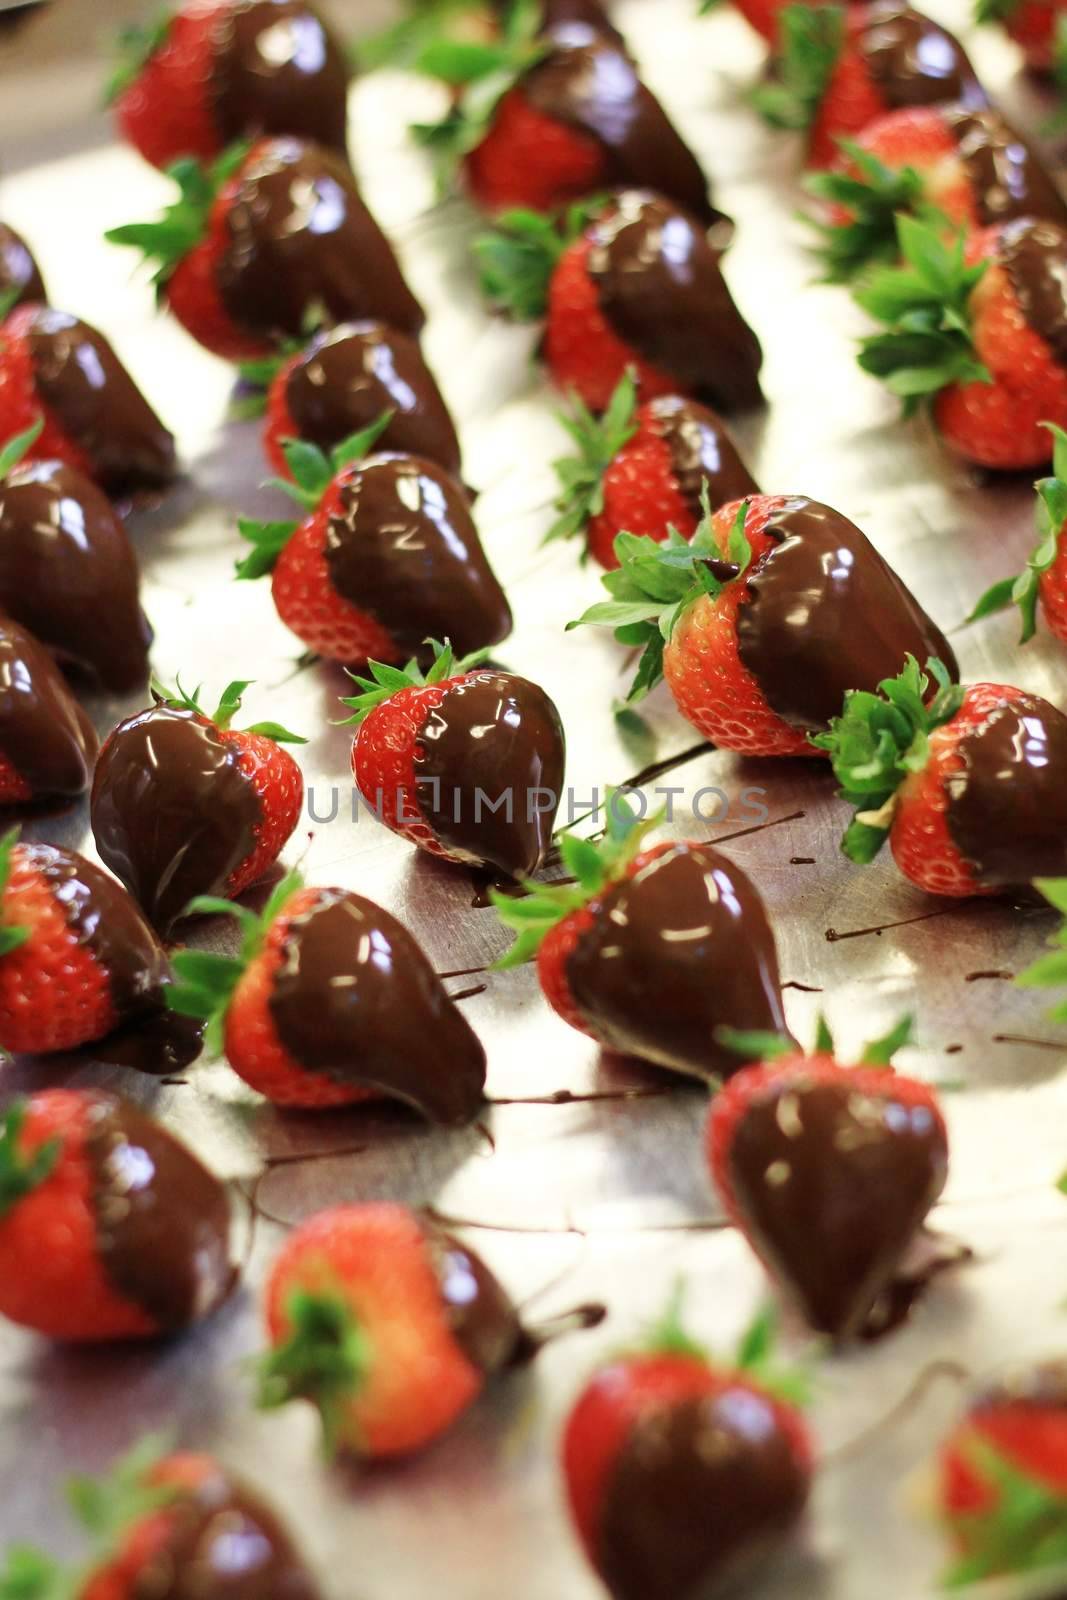 dipped strawberries by neil_langan